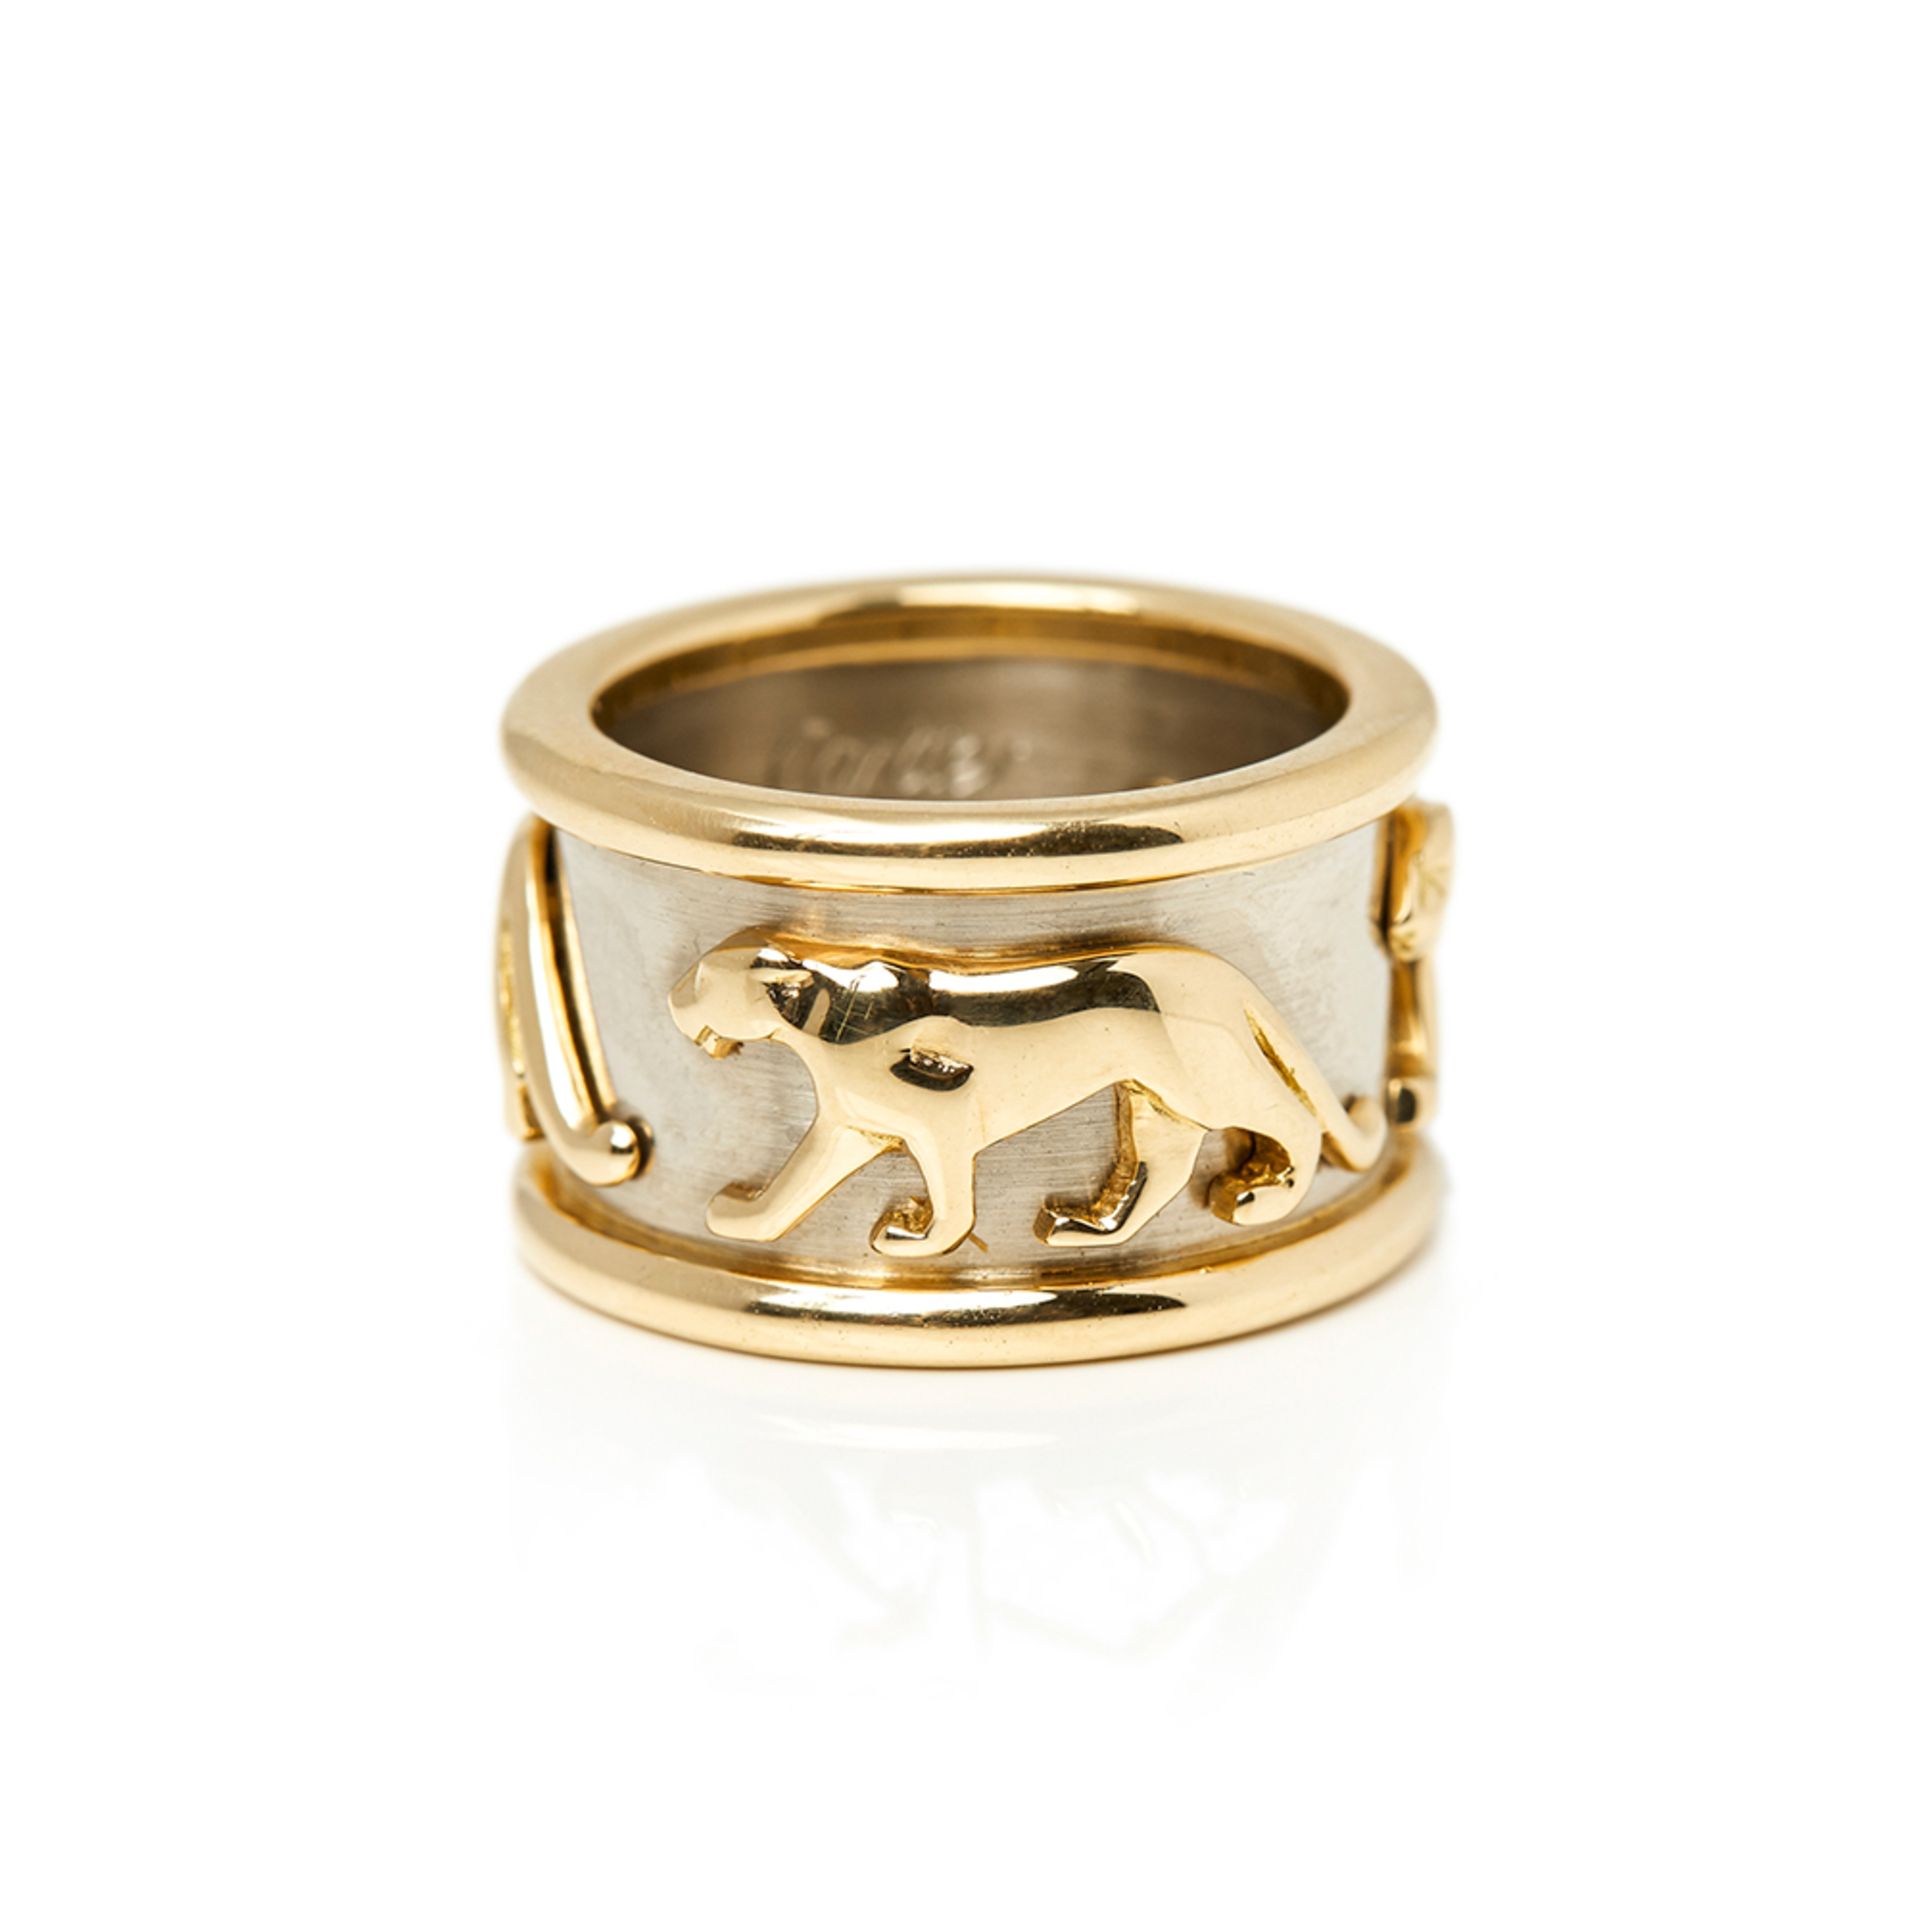 Cartier 18k Yellow & 18 White Gold Panthère Ring - Image 4 of 7